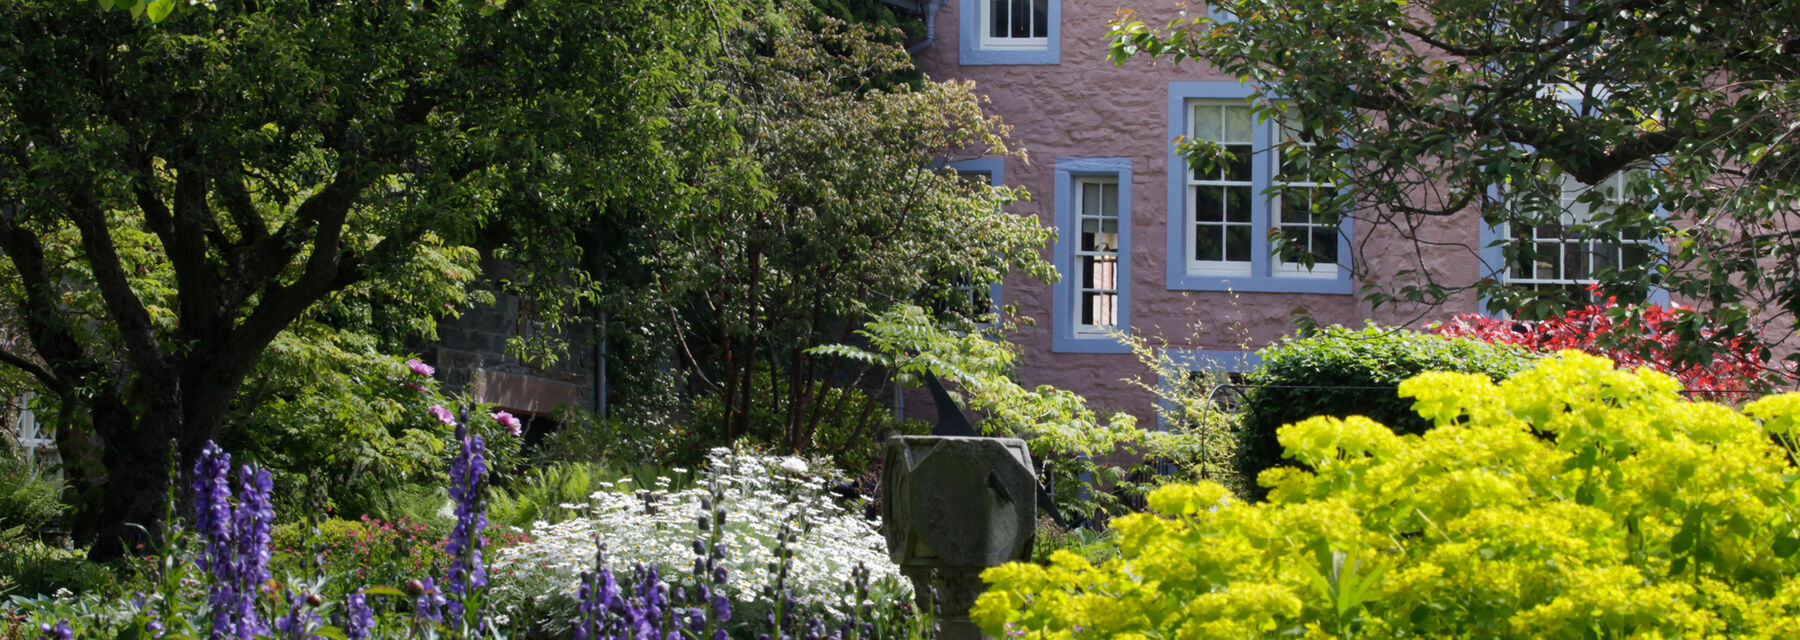 A view of the pink walls of a stone townhouse, seen from a colourful and lush garden. Irises grown in the foreground.